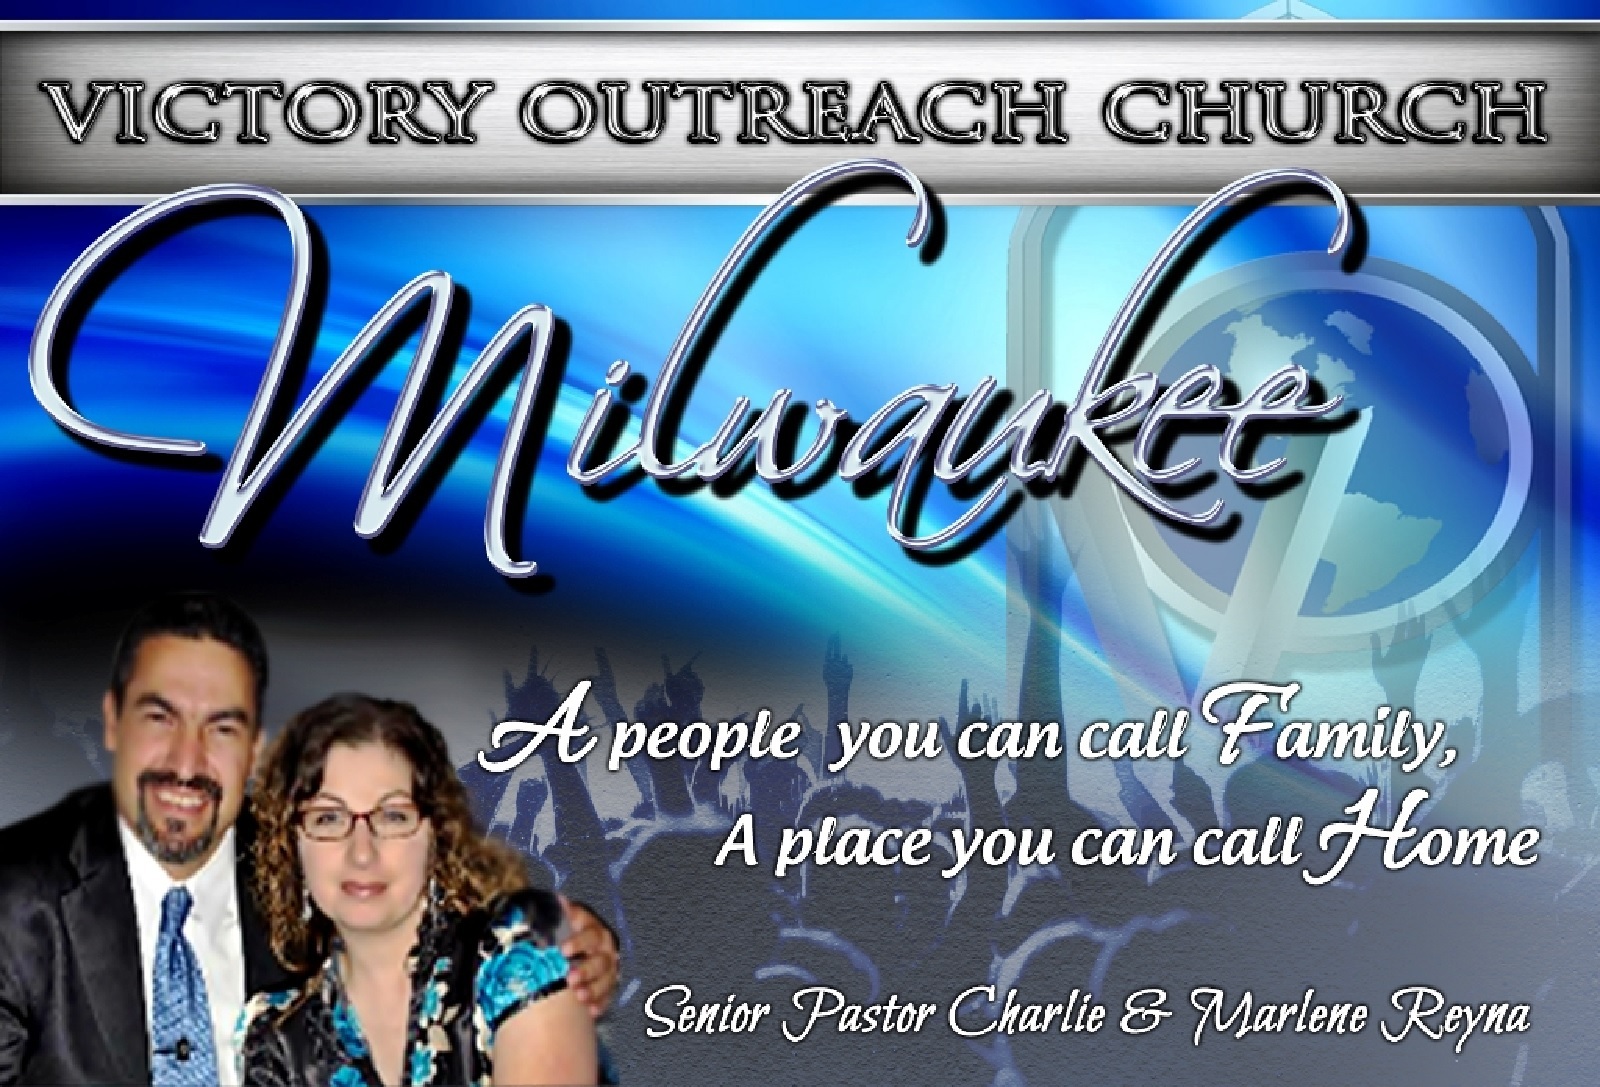 Victory Outreach